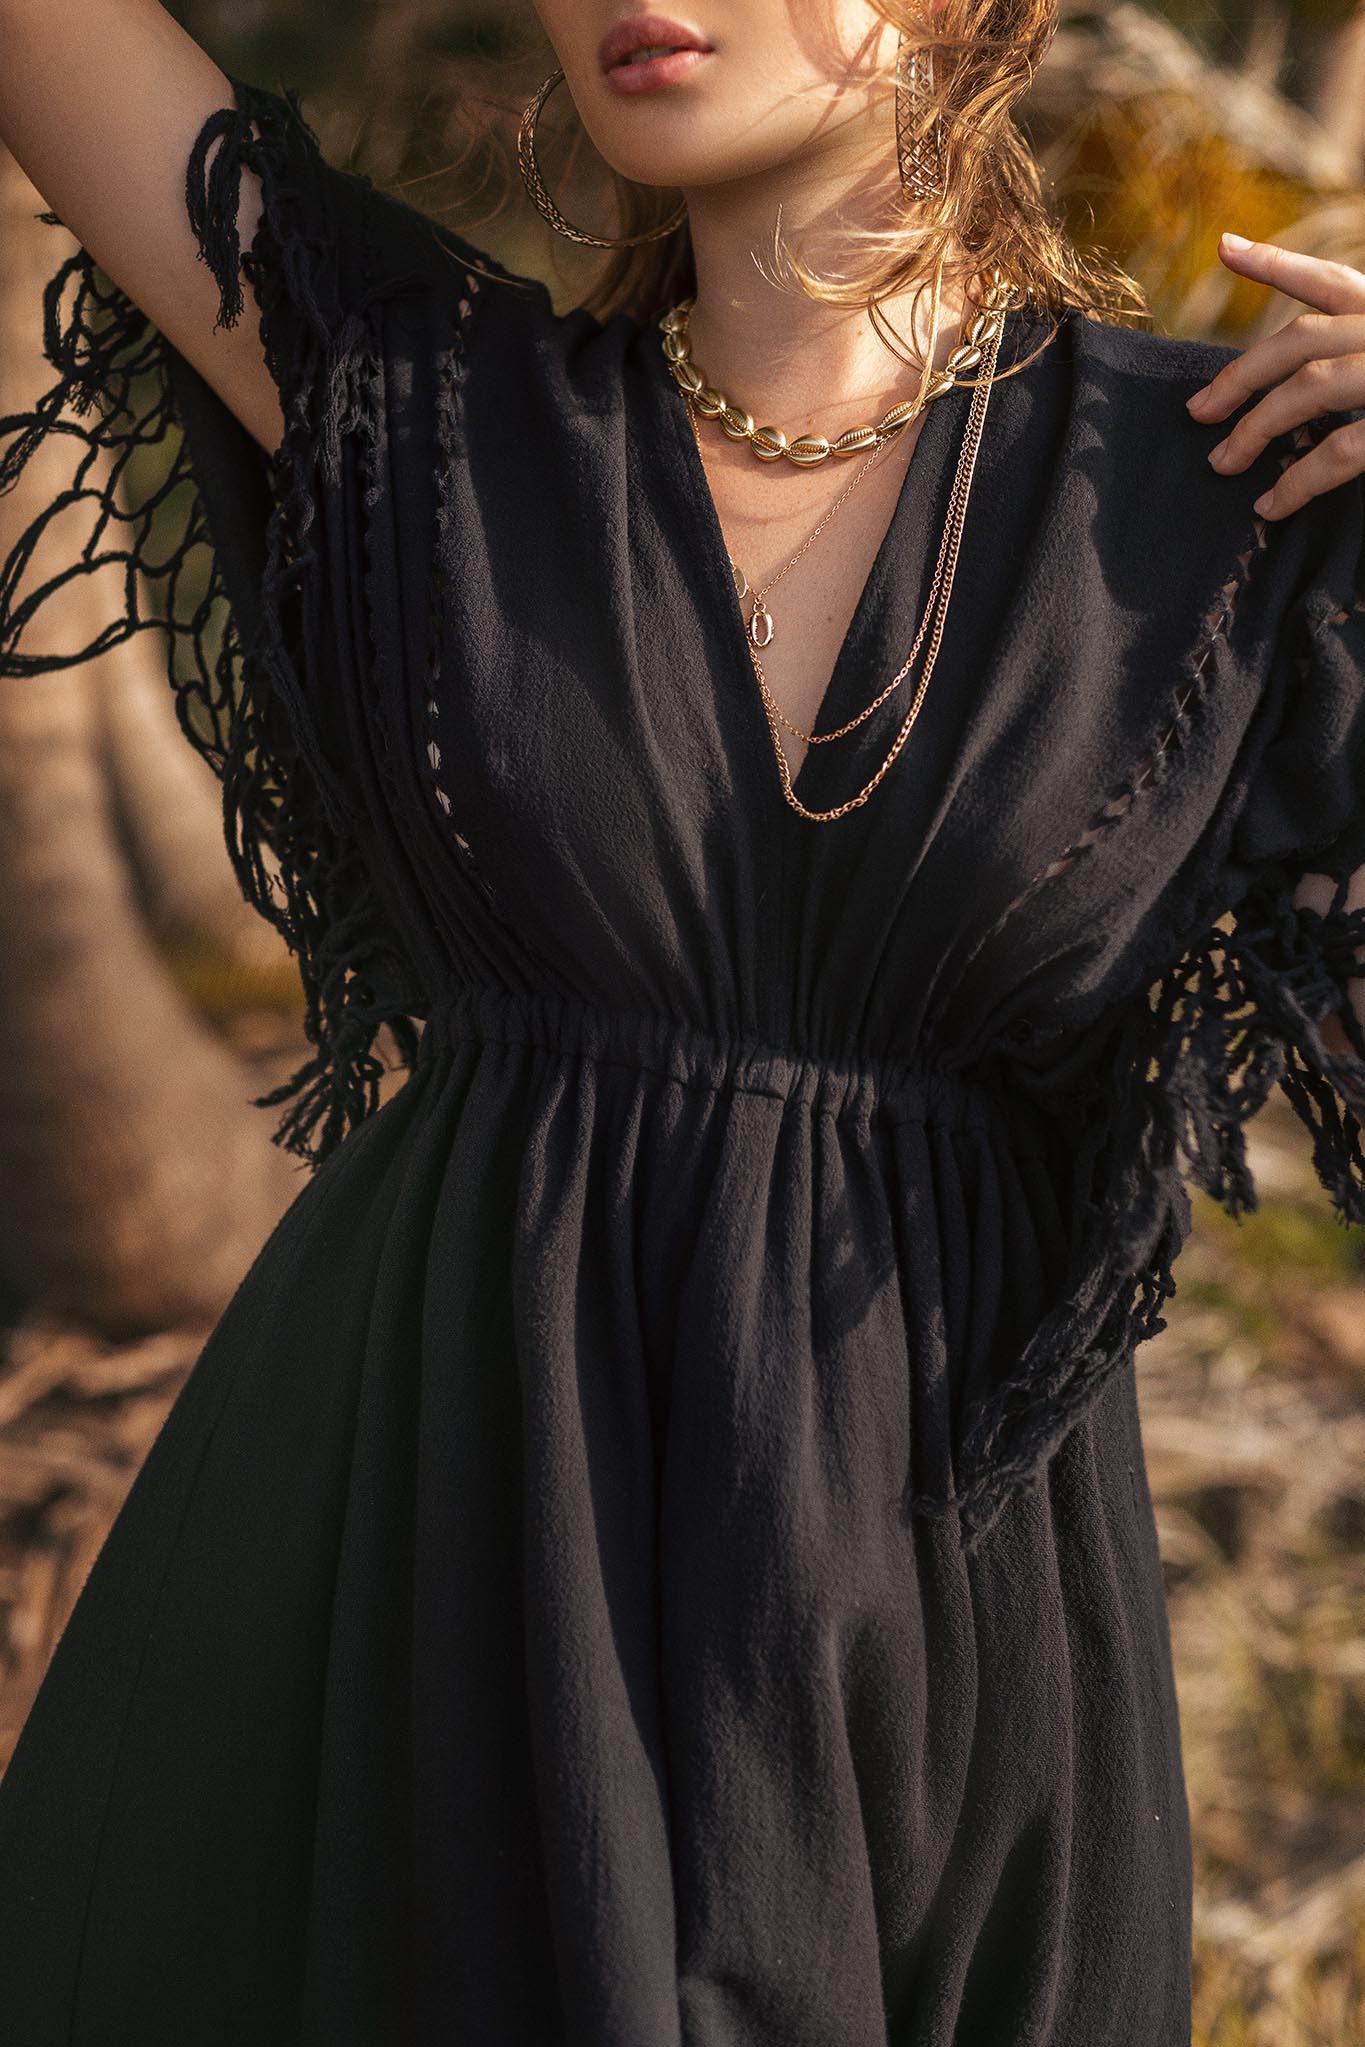 This maxi dress is a must have in every woman's wardrobe.